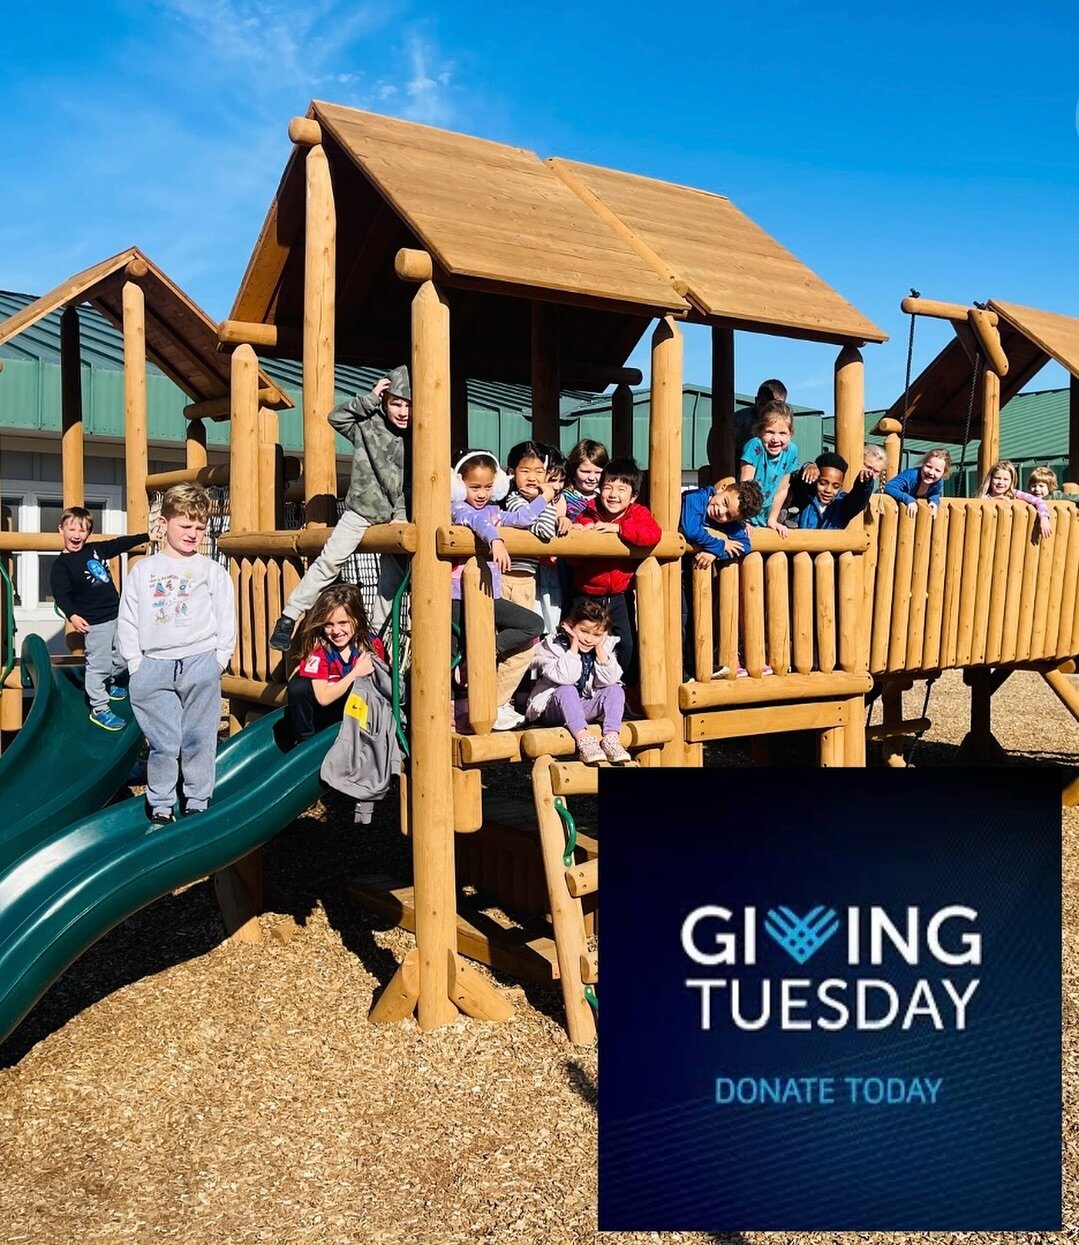 Thank you for being a part of the Daycroft community and supporting Daycroft School.  Today on Giving Tuesday, your donation to the Daycroft Annual Fund has helped to support things like needed Montessori materials, new playgrounds, restoring our nat